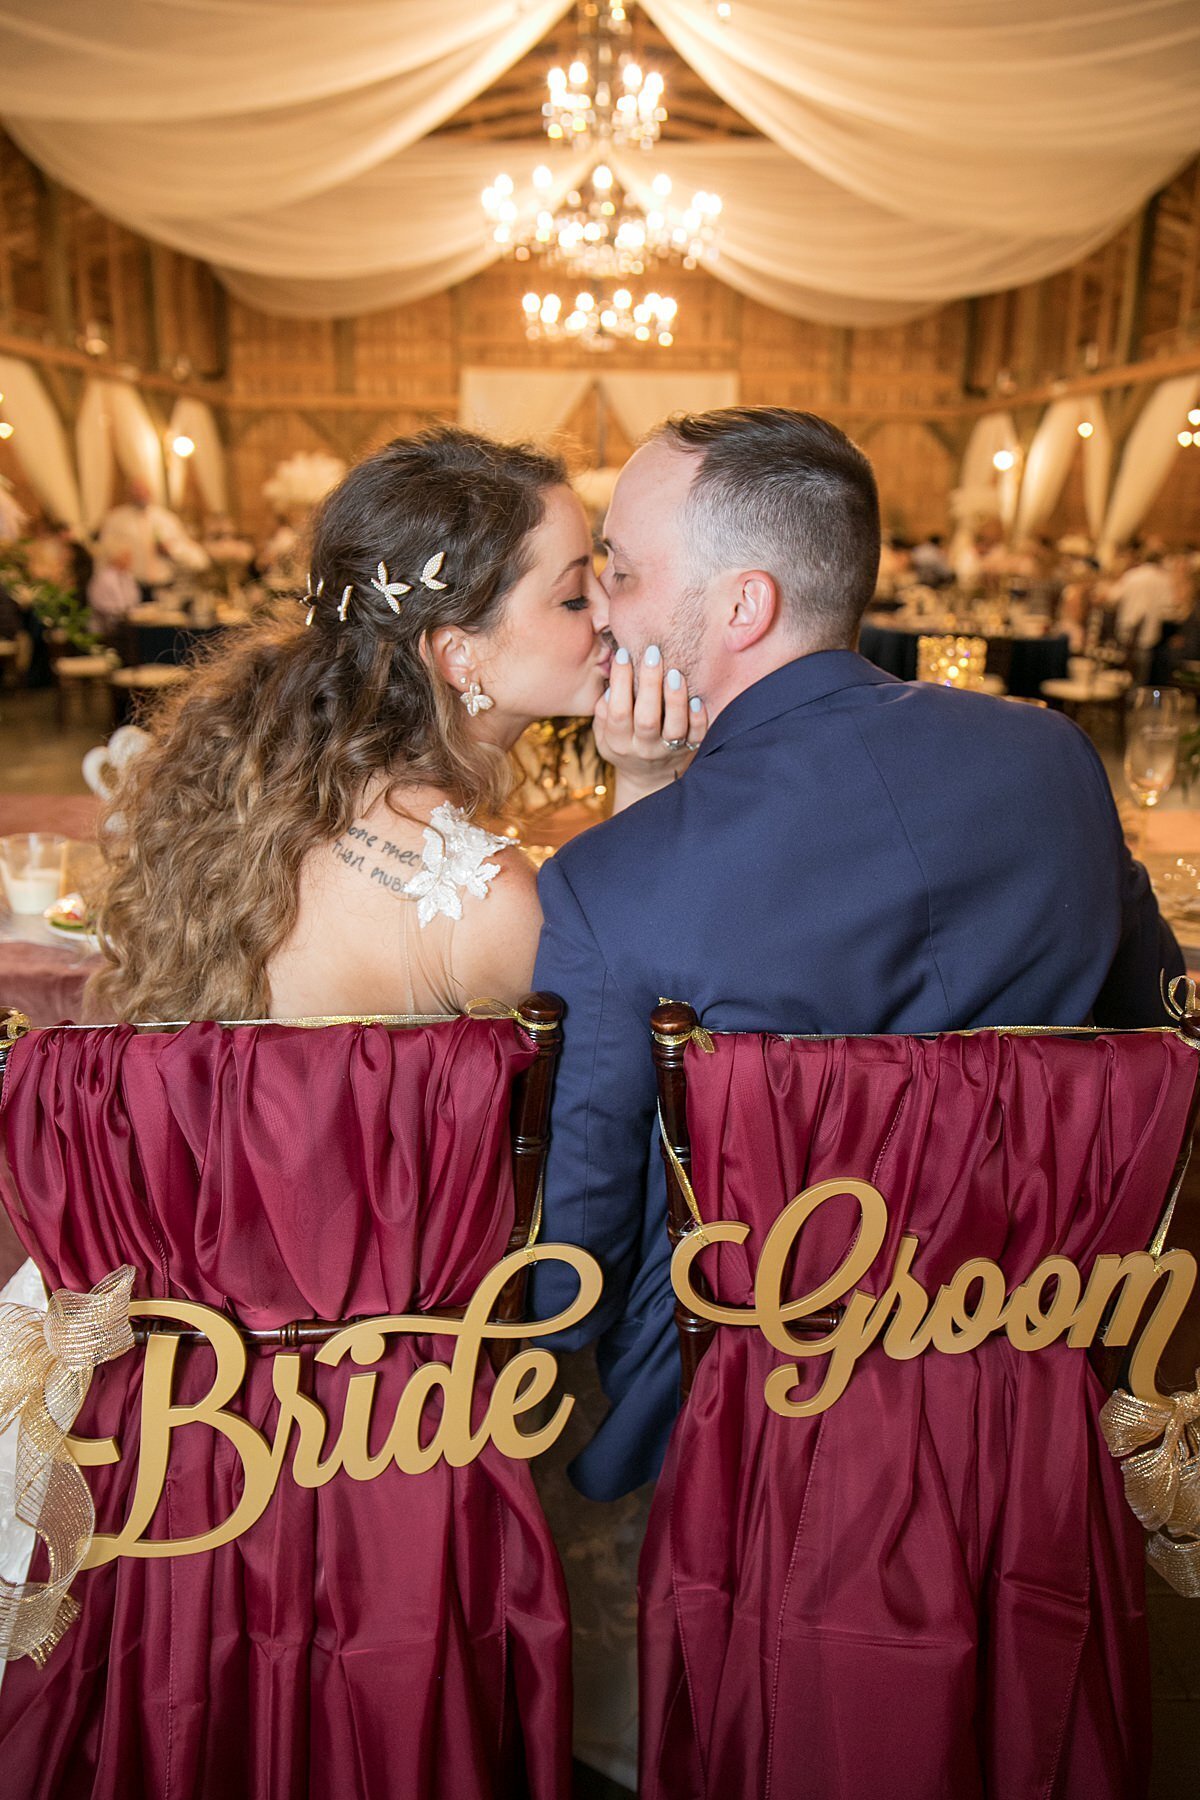 The bride and groom kiss at their Saddle Woods Wedding reception while sitting in their specially decorated chiavari chairs covered with burgundy organza fabric and gold BRIDE and GROOM calligraphy signs. The ceiling is draped in sheer ivory fabric accented by crystal and gold candelabra chandeliers.